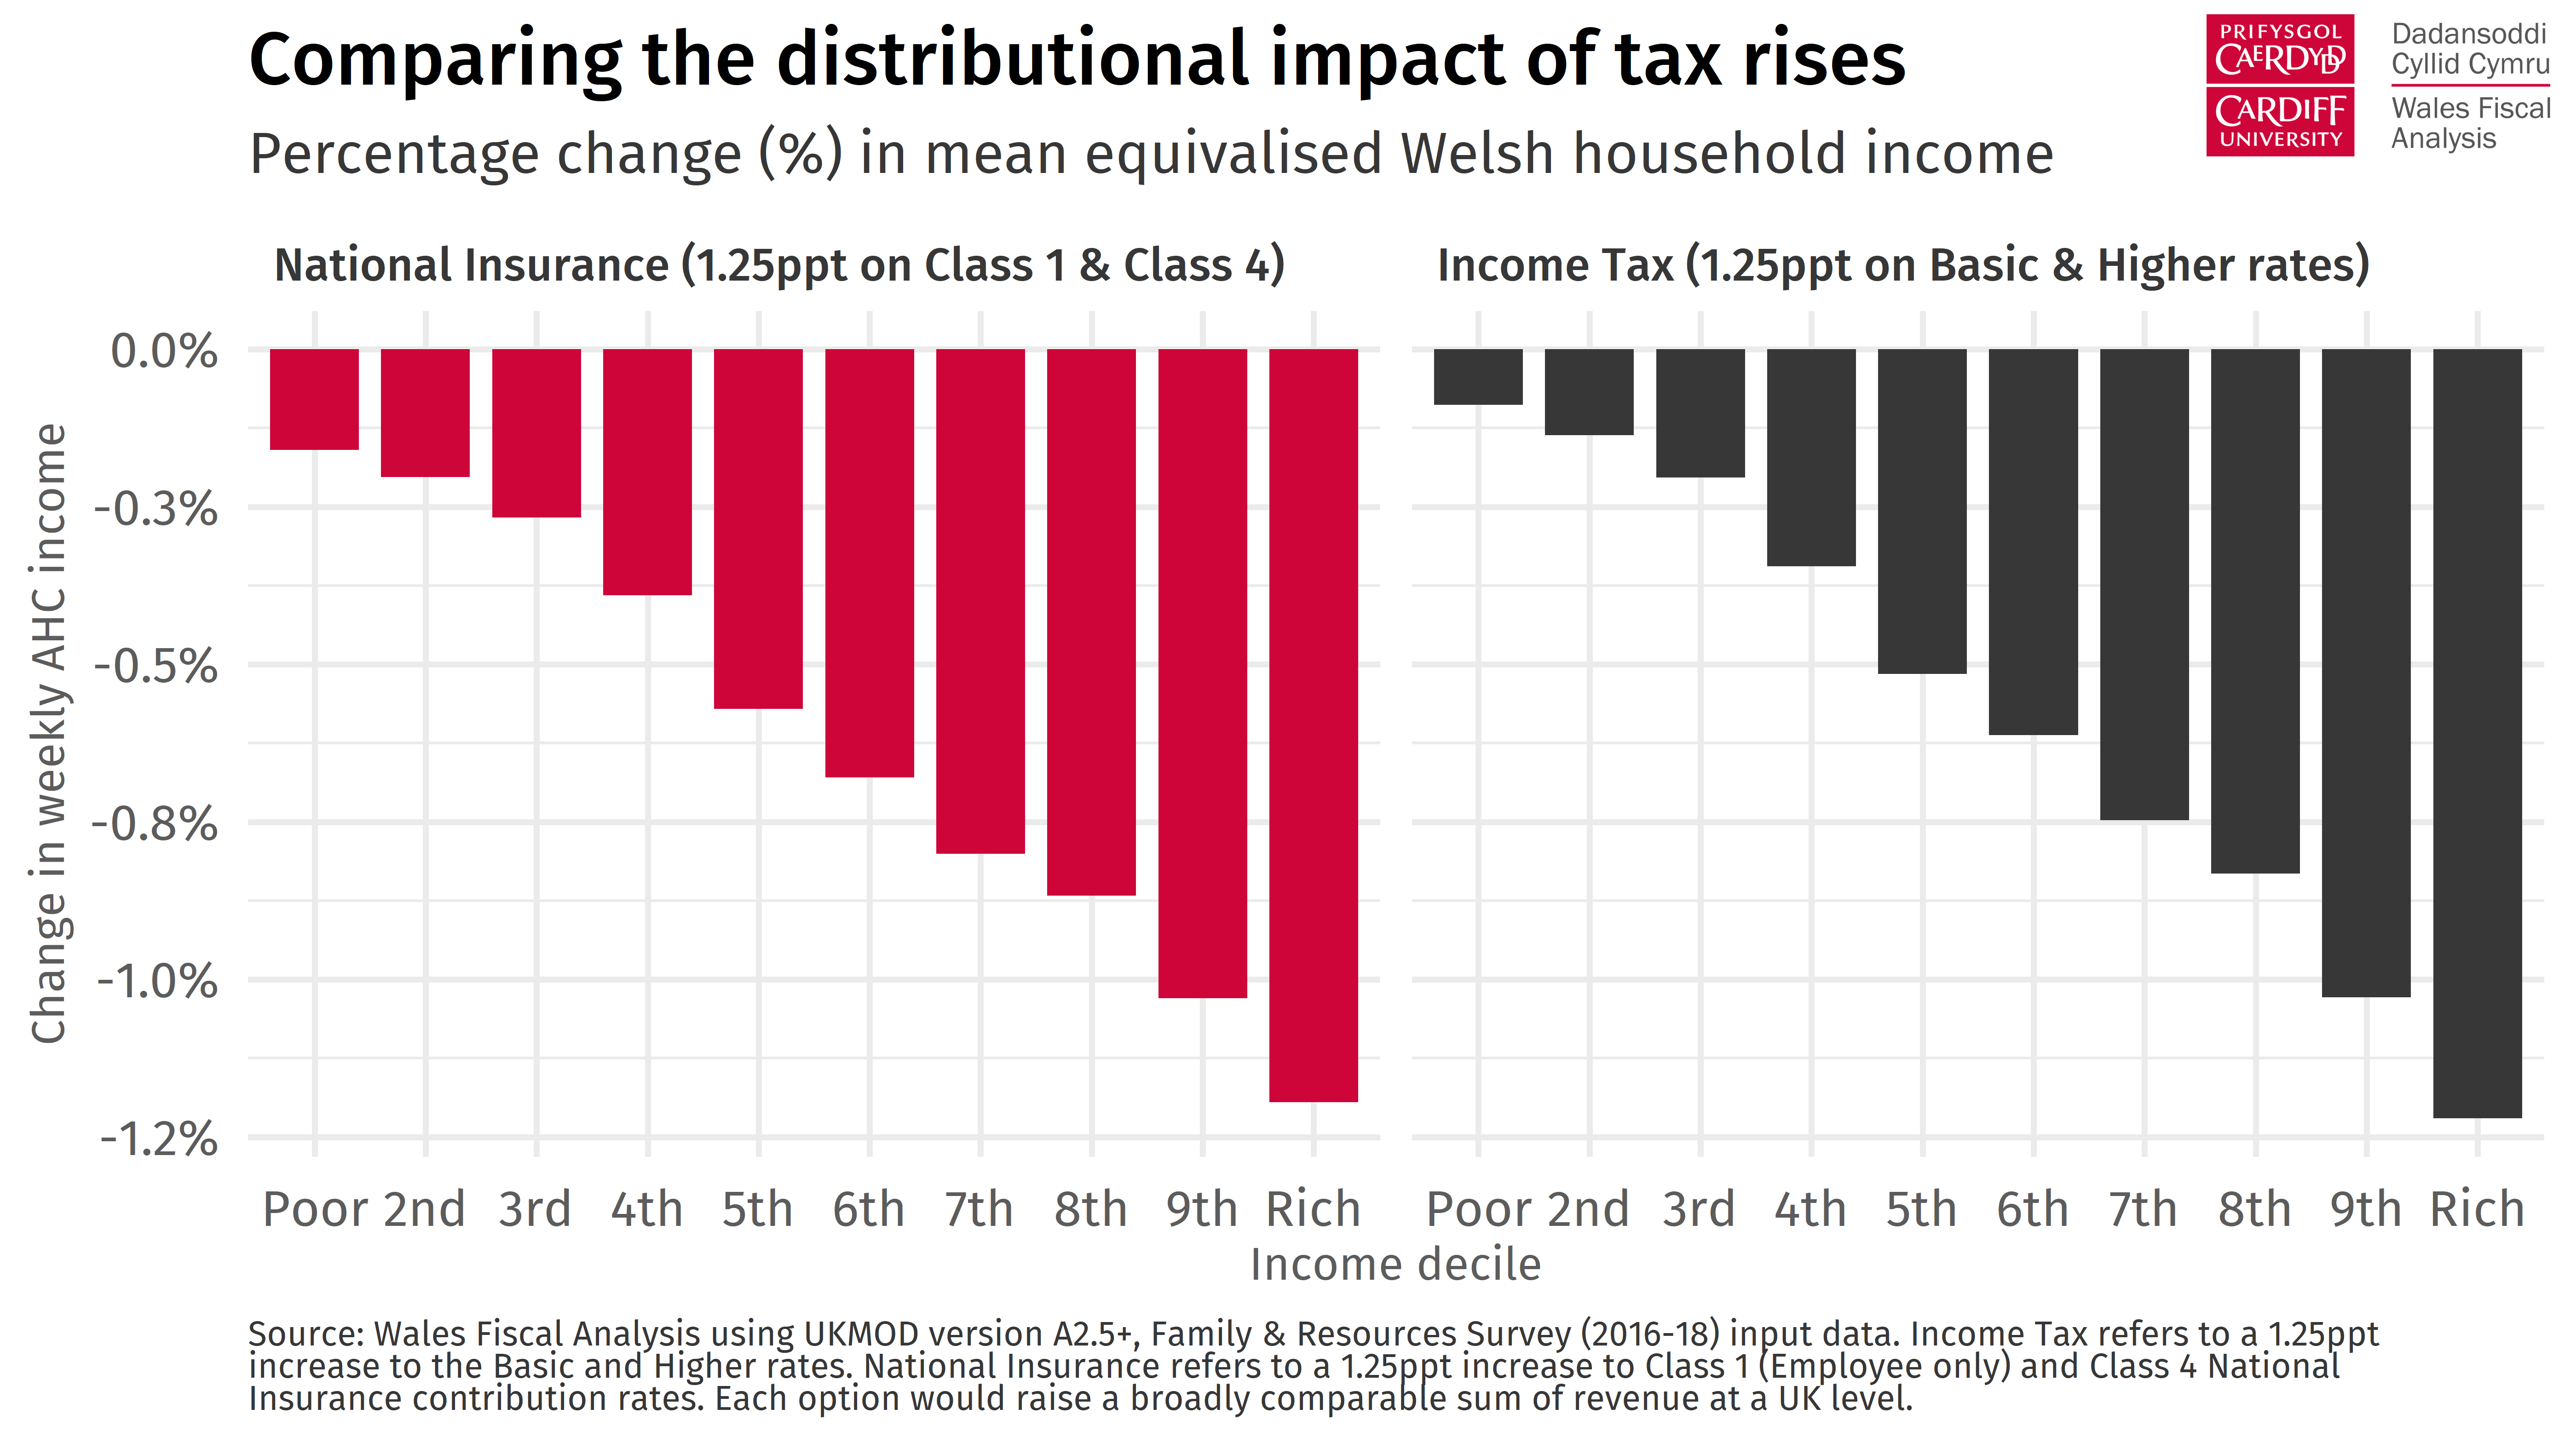 Bar chart comparing the distributional impact of a 1.25ppt increase in Class 1 and 4 National Insurance rates with a 1.25ppt increase to the basic and higher rates of income tax. Both options would raise a broadly comparable sum at a UK level, and the impact on Welsh households are similar.